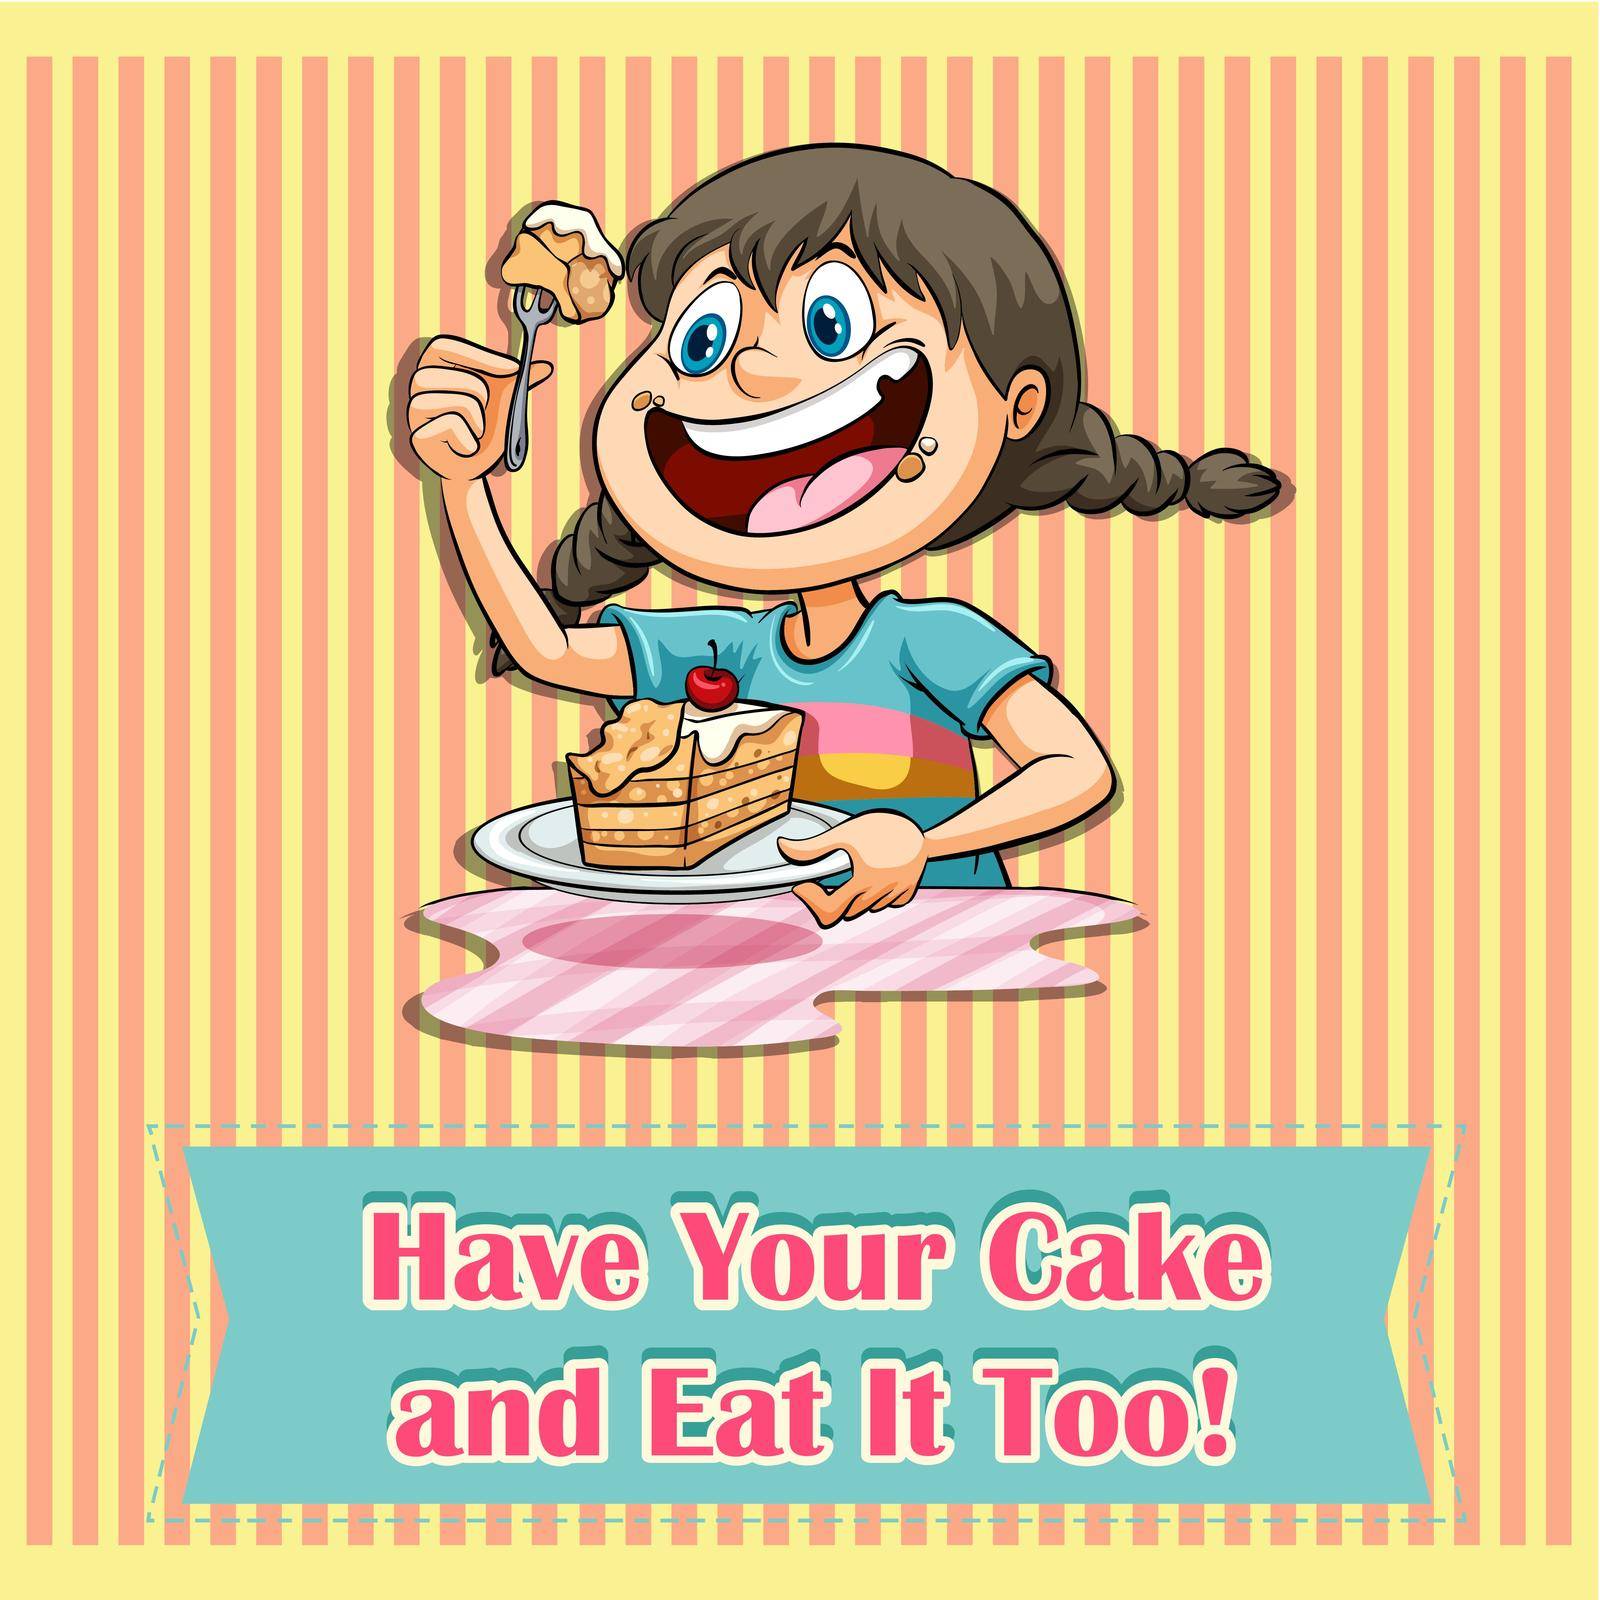 Have your cake and eat it by iimages